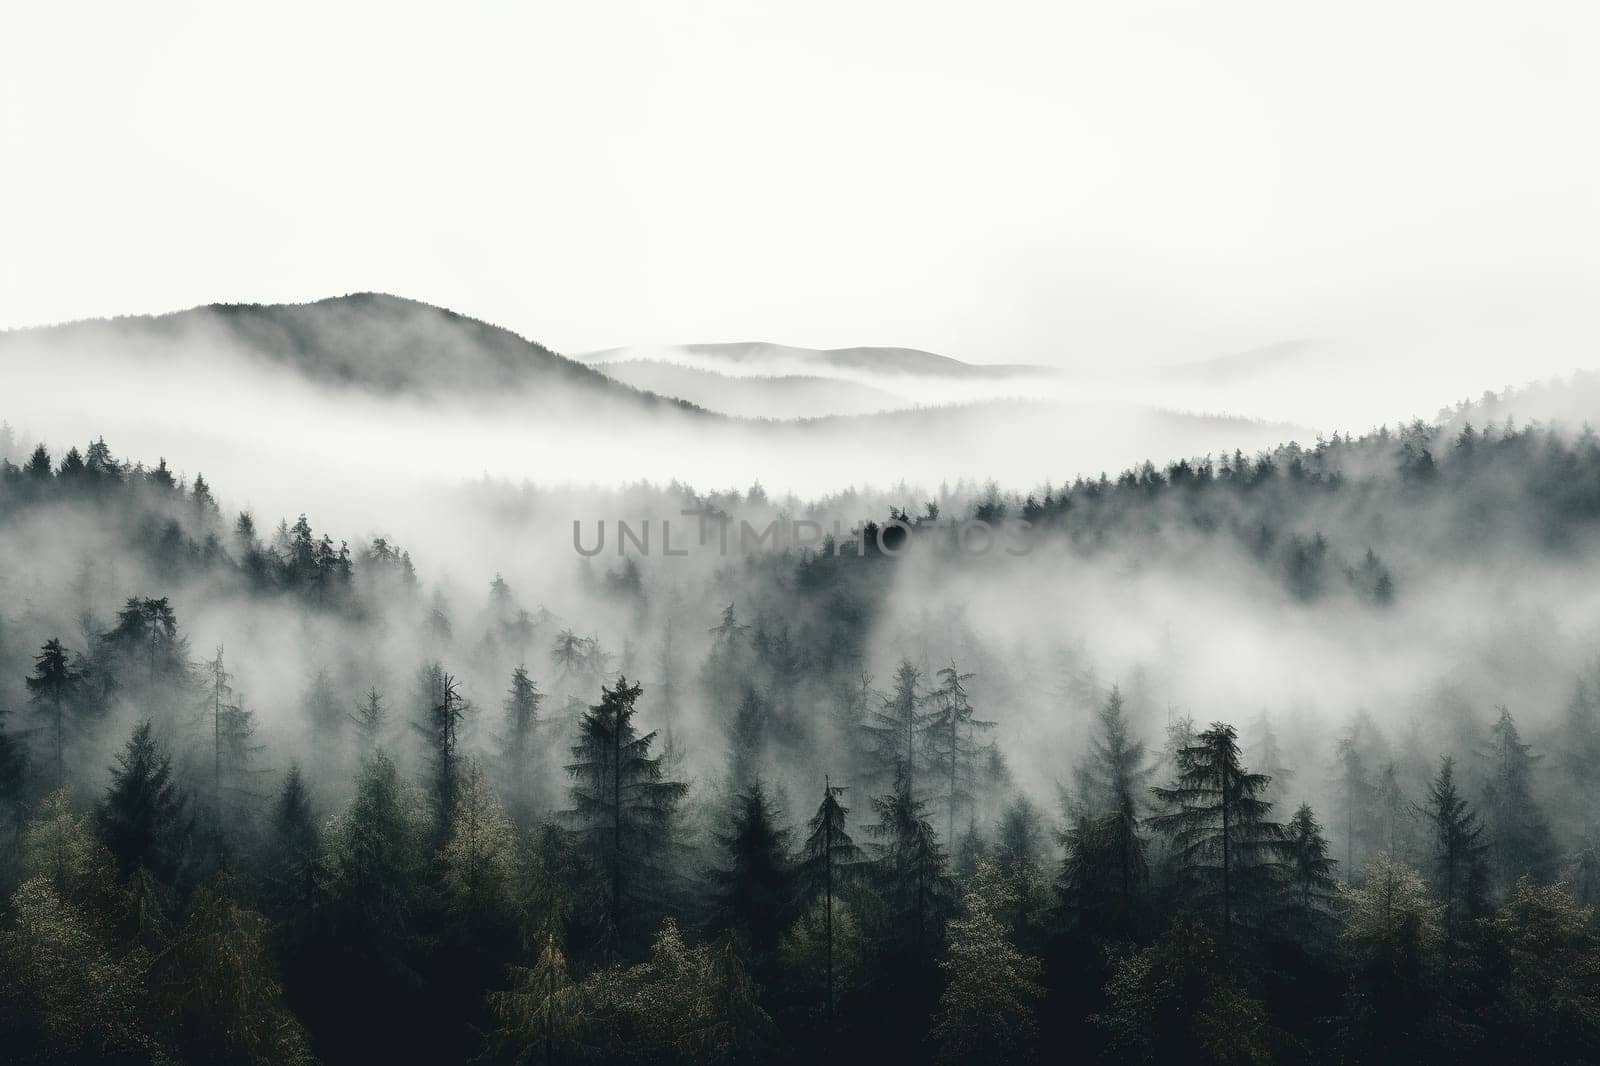 Top view of a misty mythical forest.